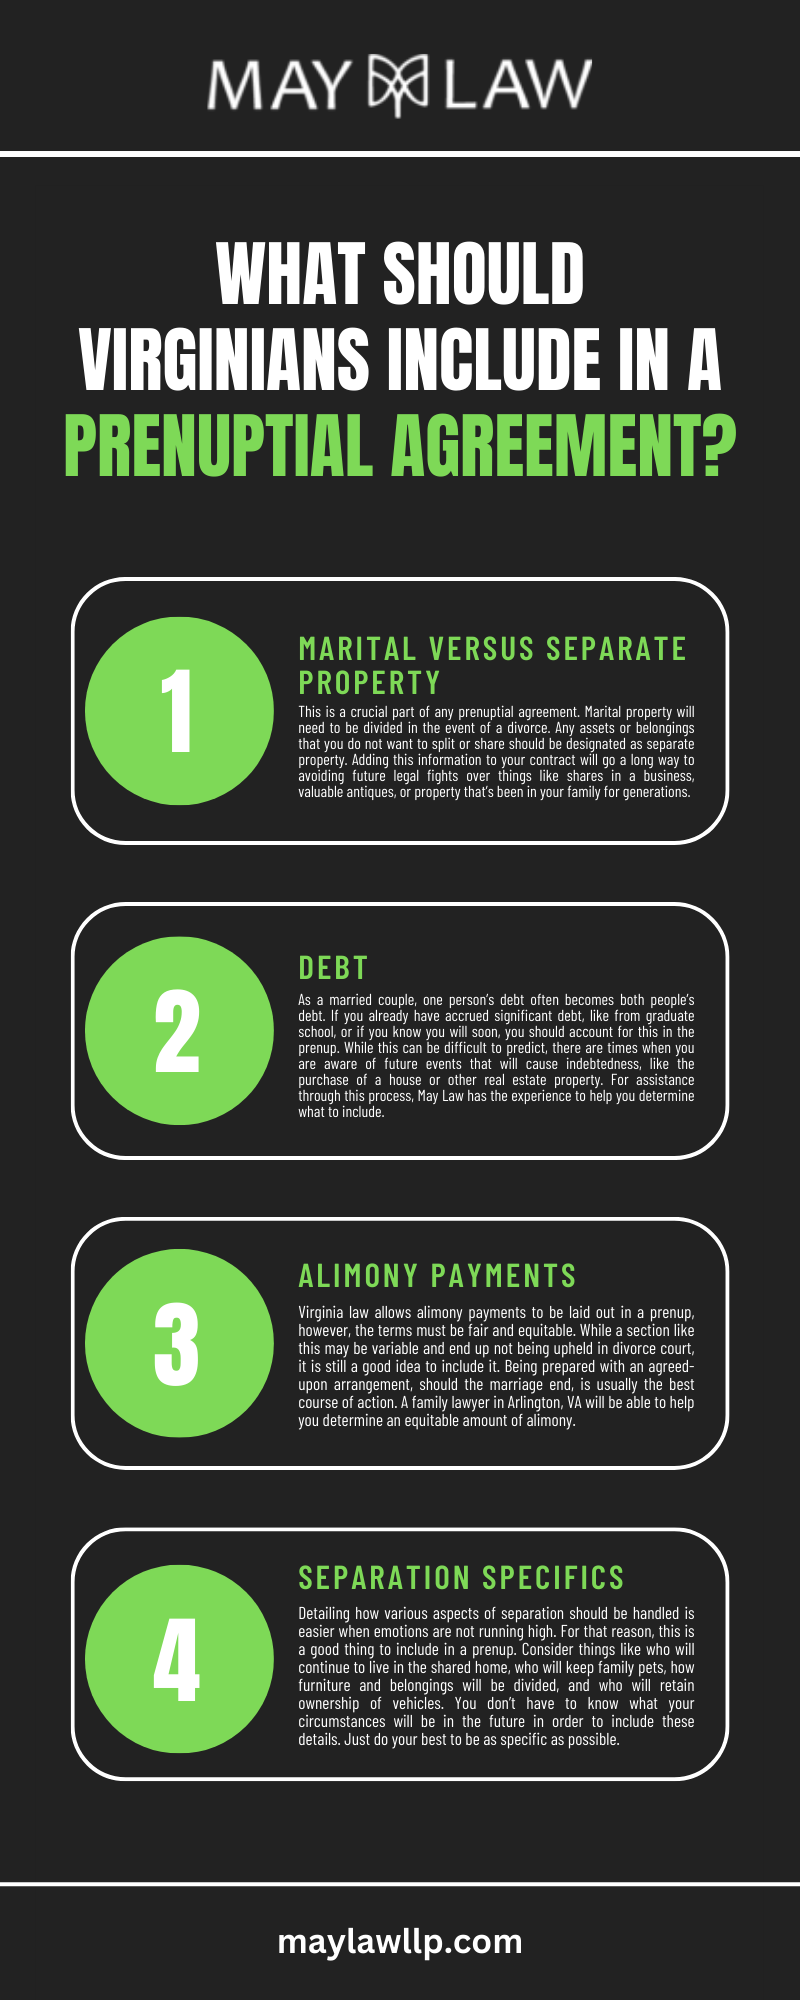 WHAT SHOULD VERGINIANS INCLUDE IN A PRENUPTIAL AGREEMENT INFOGRAPHIC